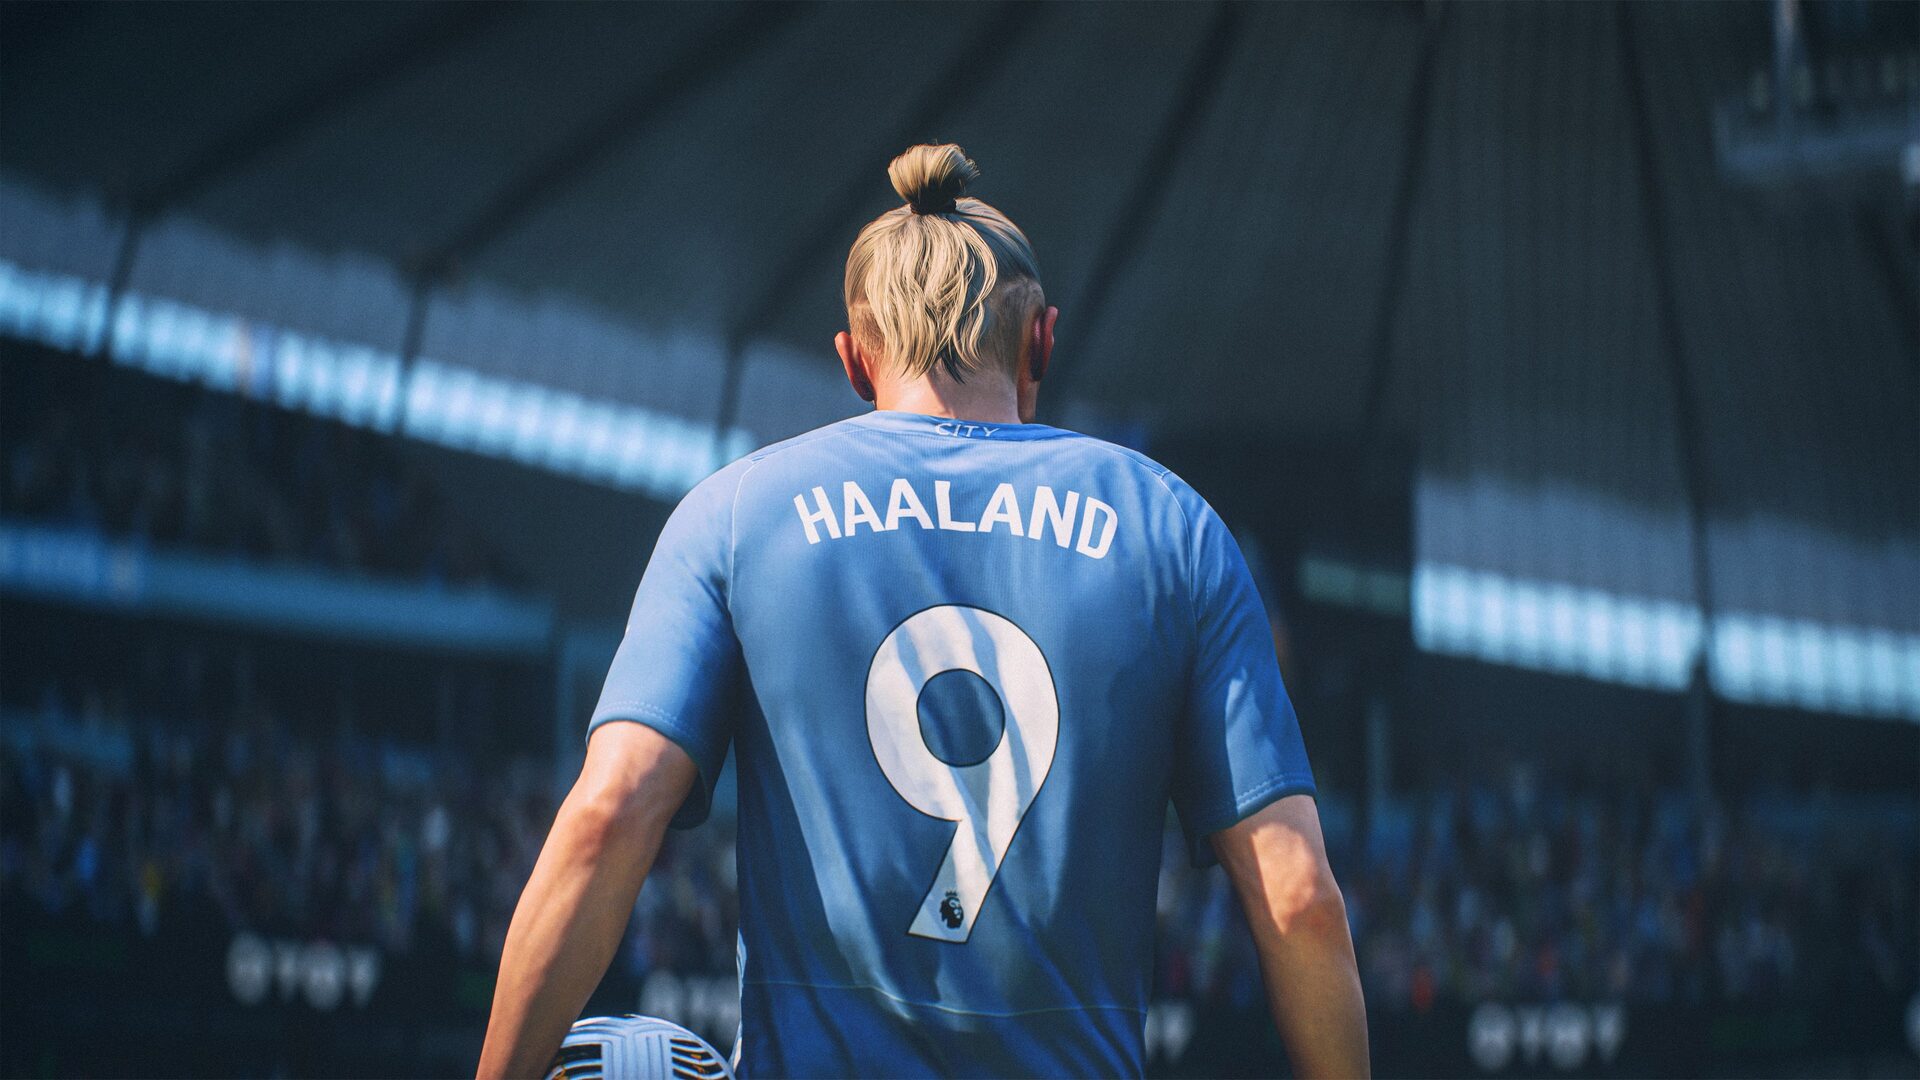 ⚽EA Sports FC 24 - Ultimate Edition STEAM/XBOX/PS5 Account - Mangafox's  Ko-fi Shop - Ko-fi ❤️ Where creators get support from fans through  donations, memberships, shop sales and more! The original 'Buy